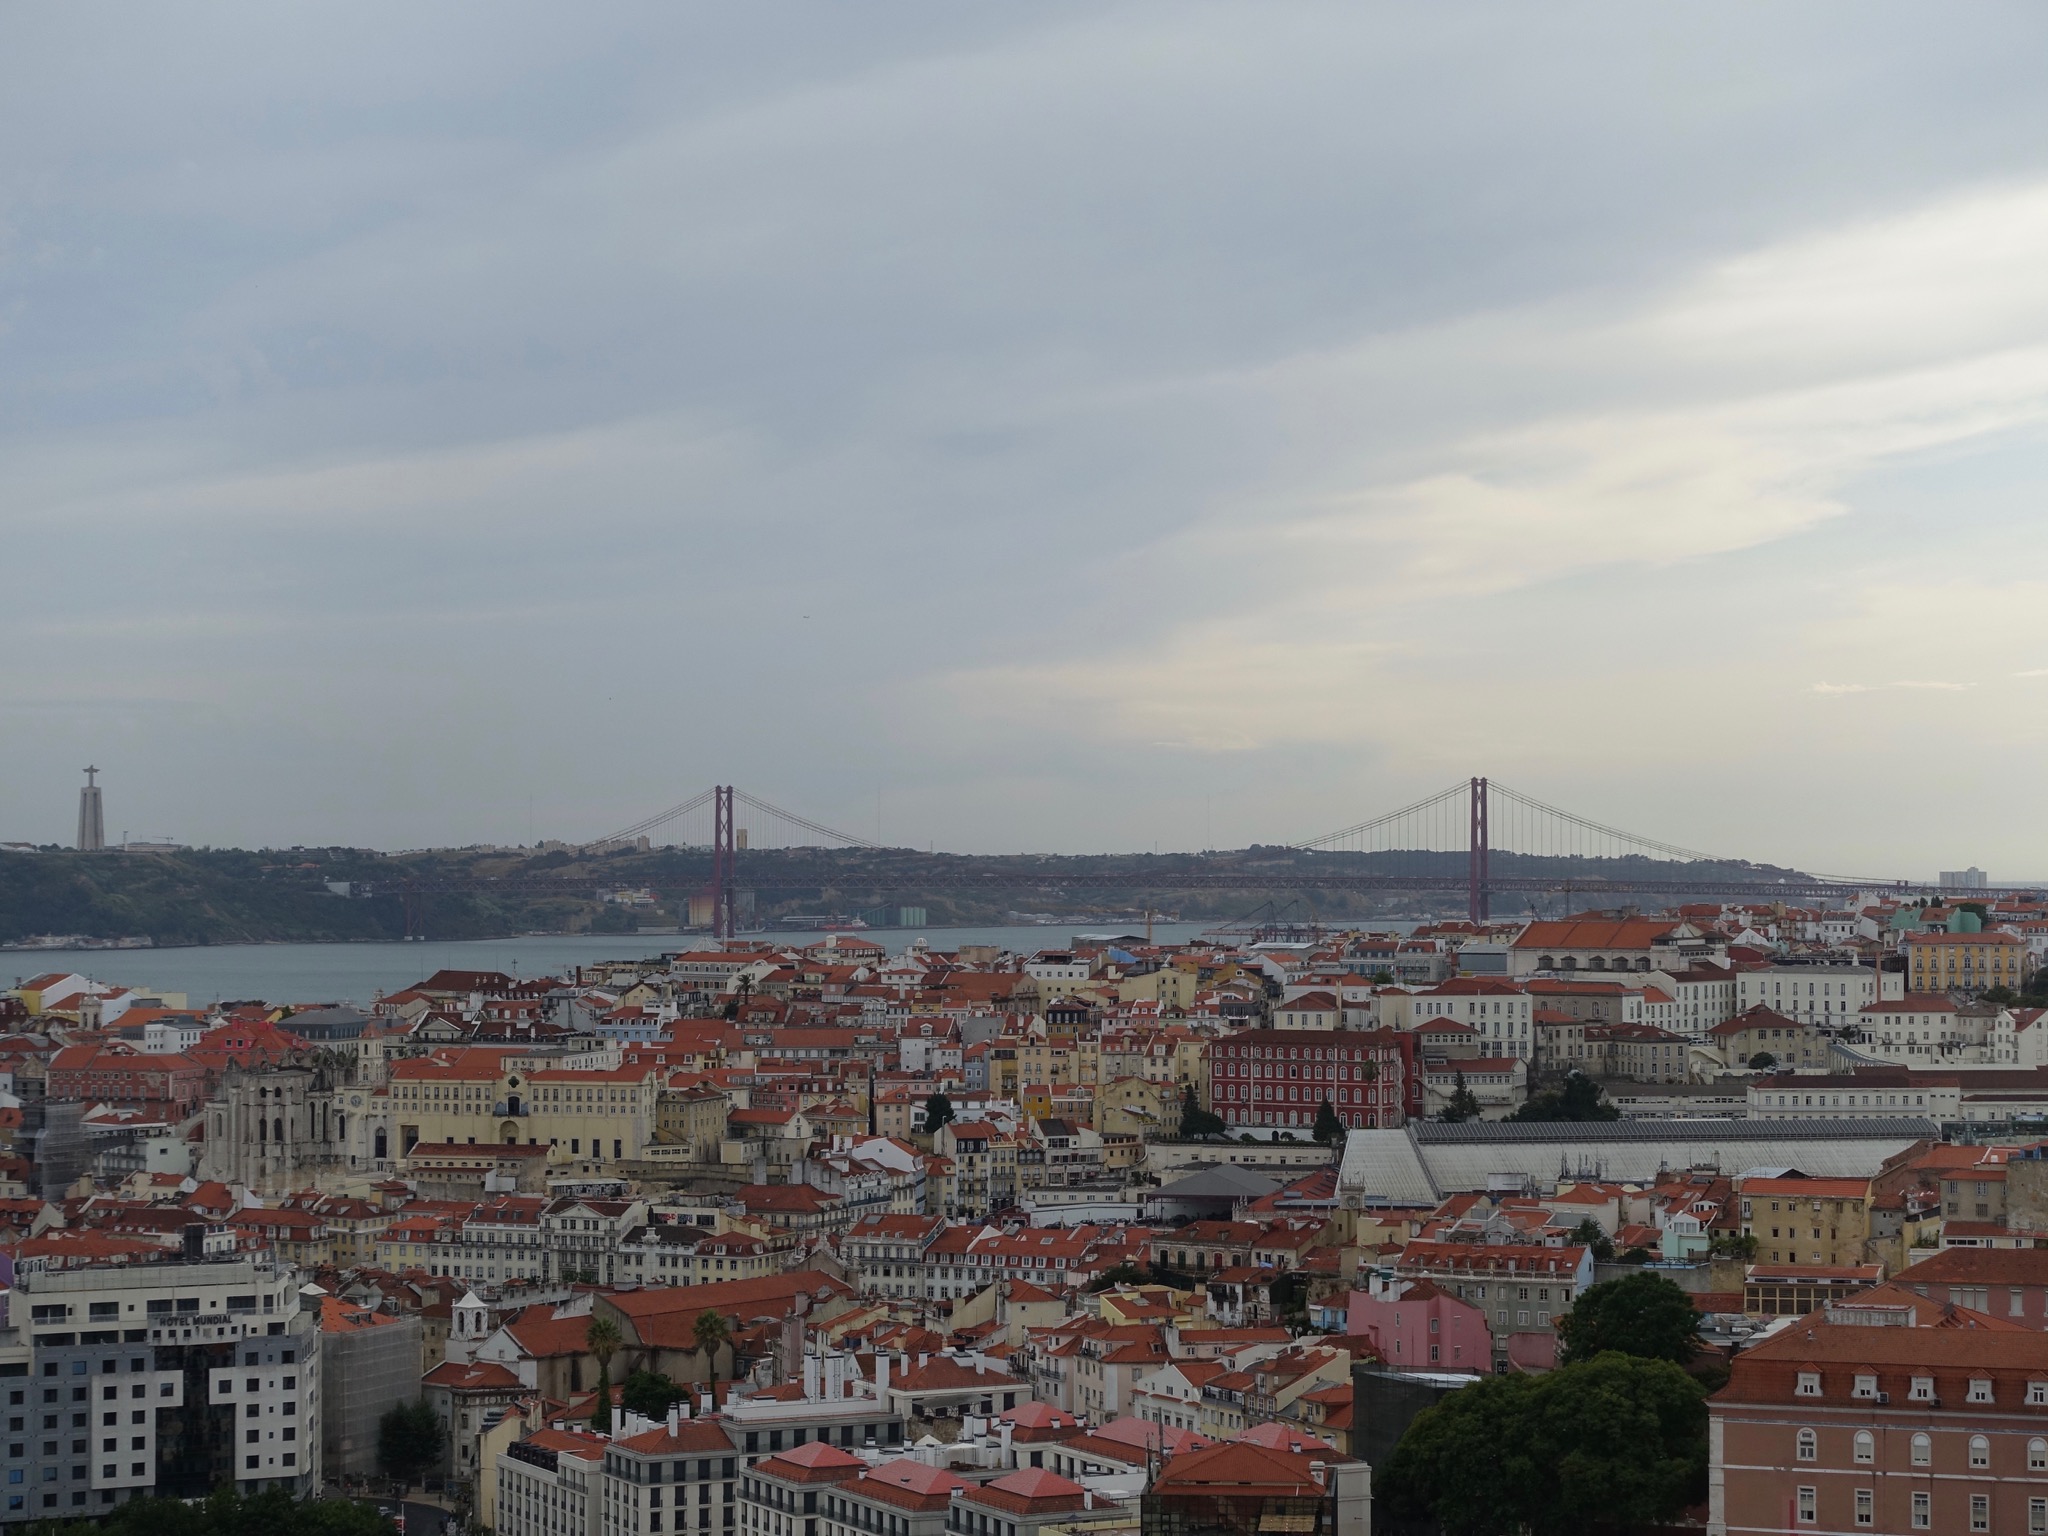 Photo 6 of 86 from the album Highlights Lisbon 2015.